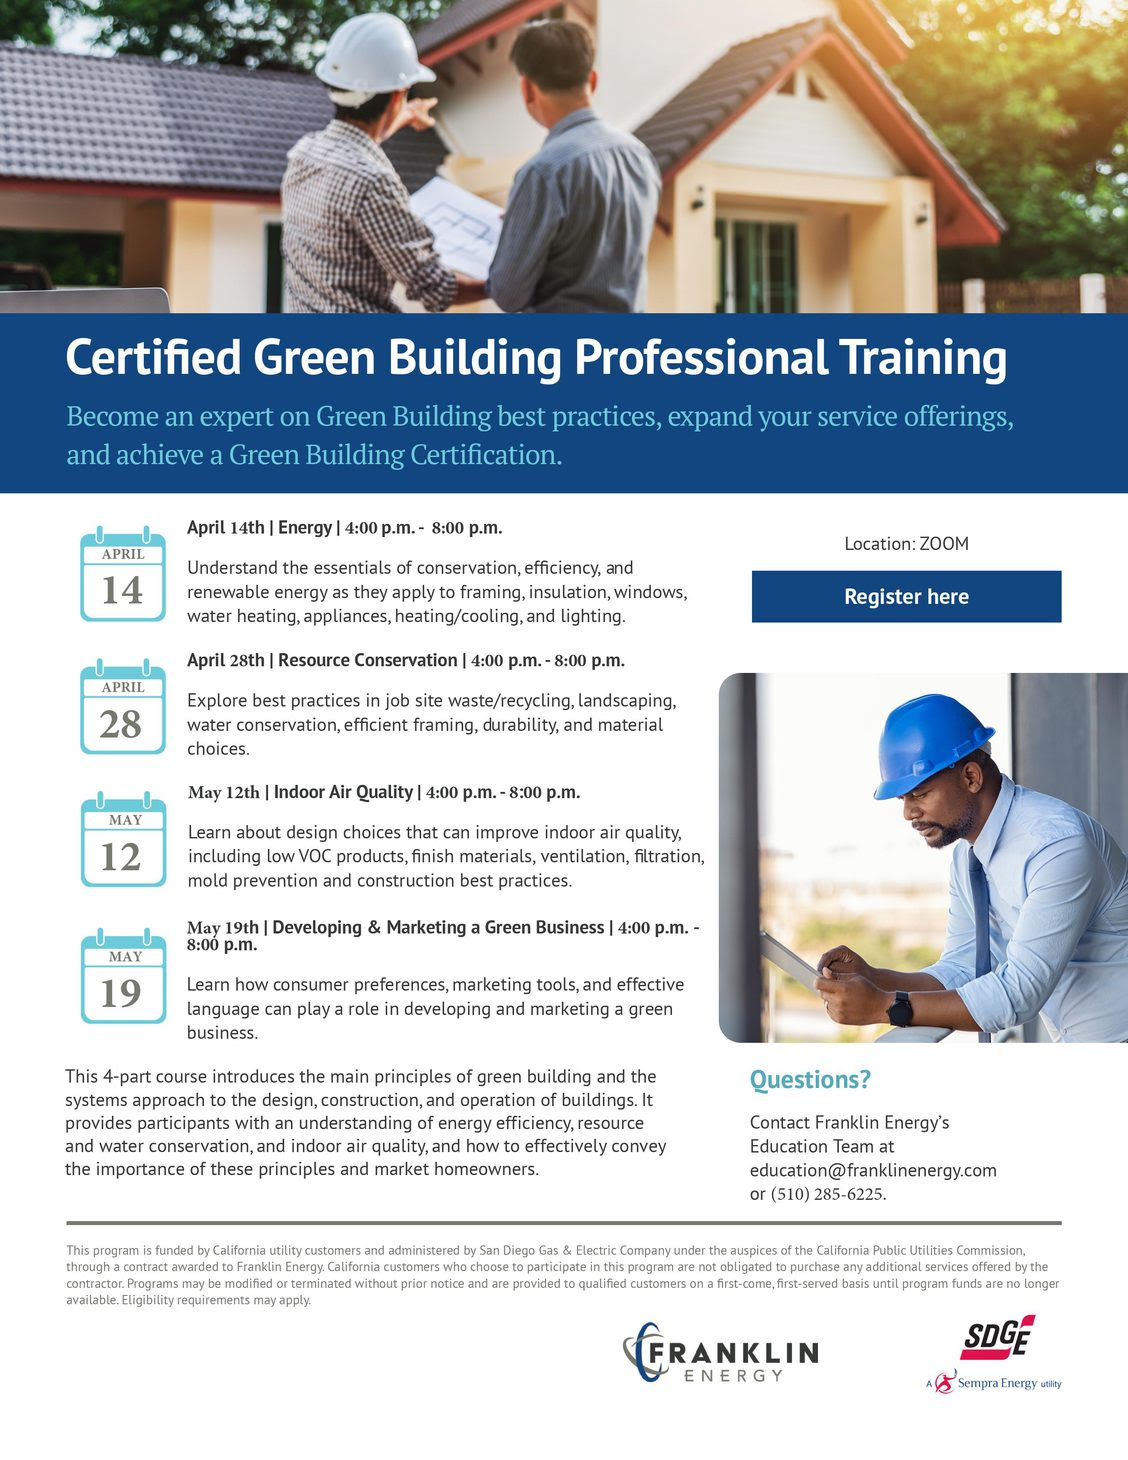 Certified Green Building Professional Training Flyer blue and white (Franklin Energy and SDSGE) Become an Expert on Green building bed practices, expand service offerings and achieve a green building certificate